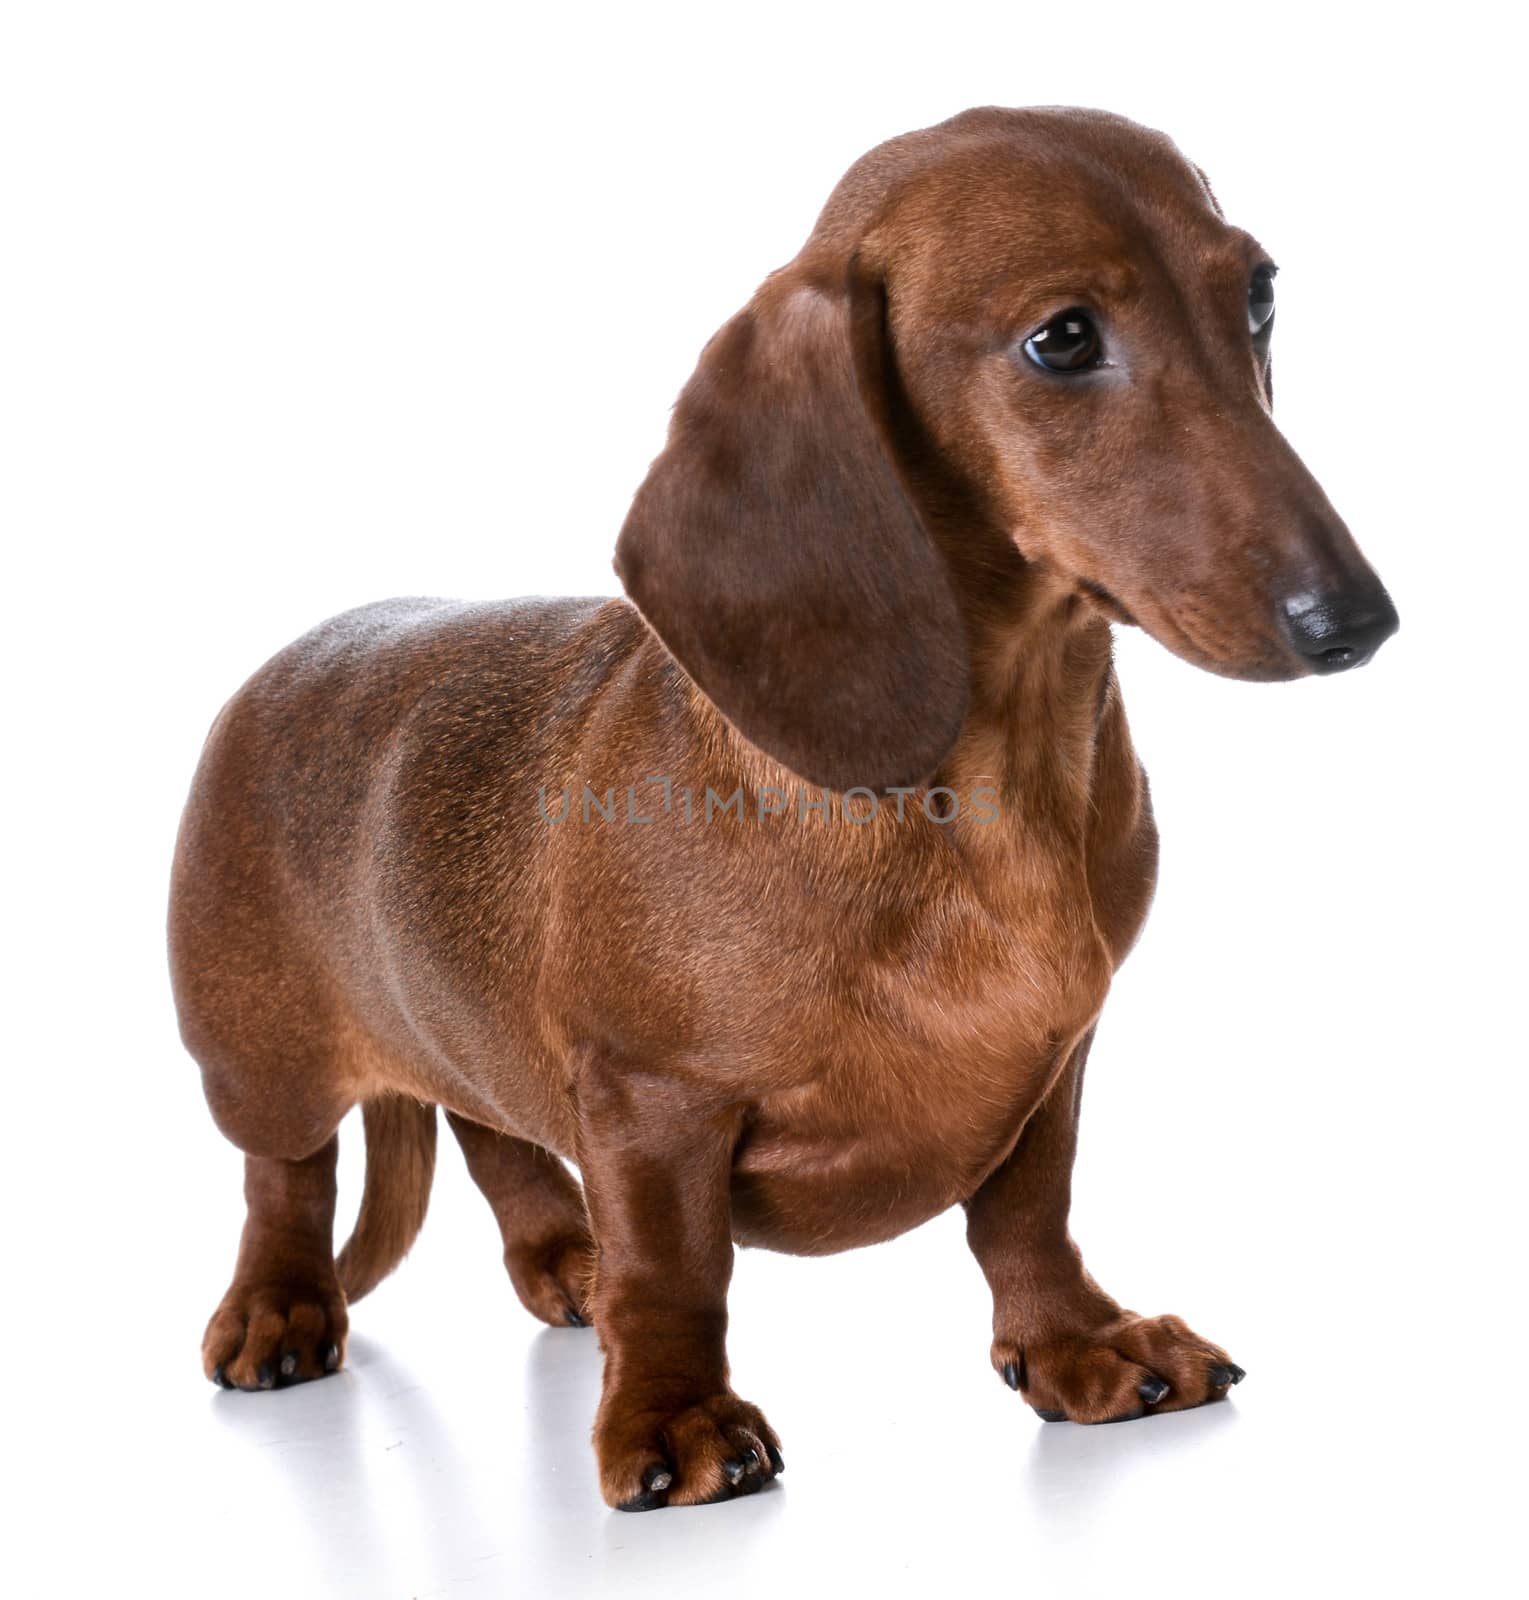 dachshund by willeecole123